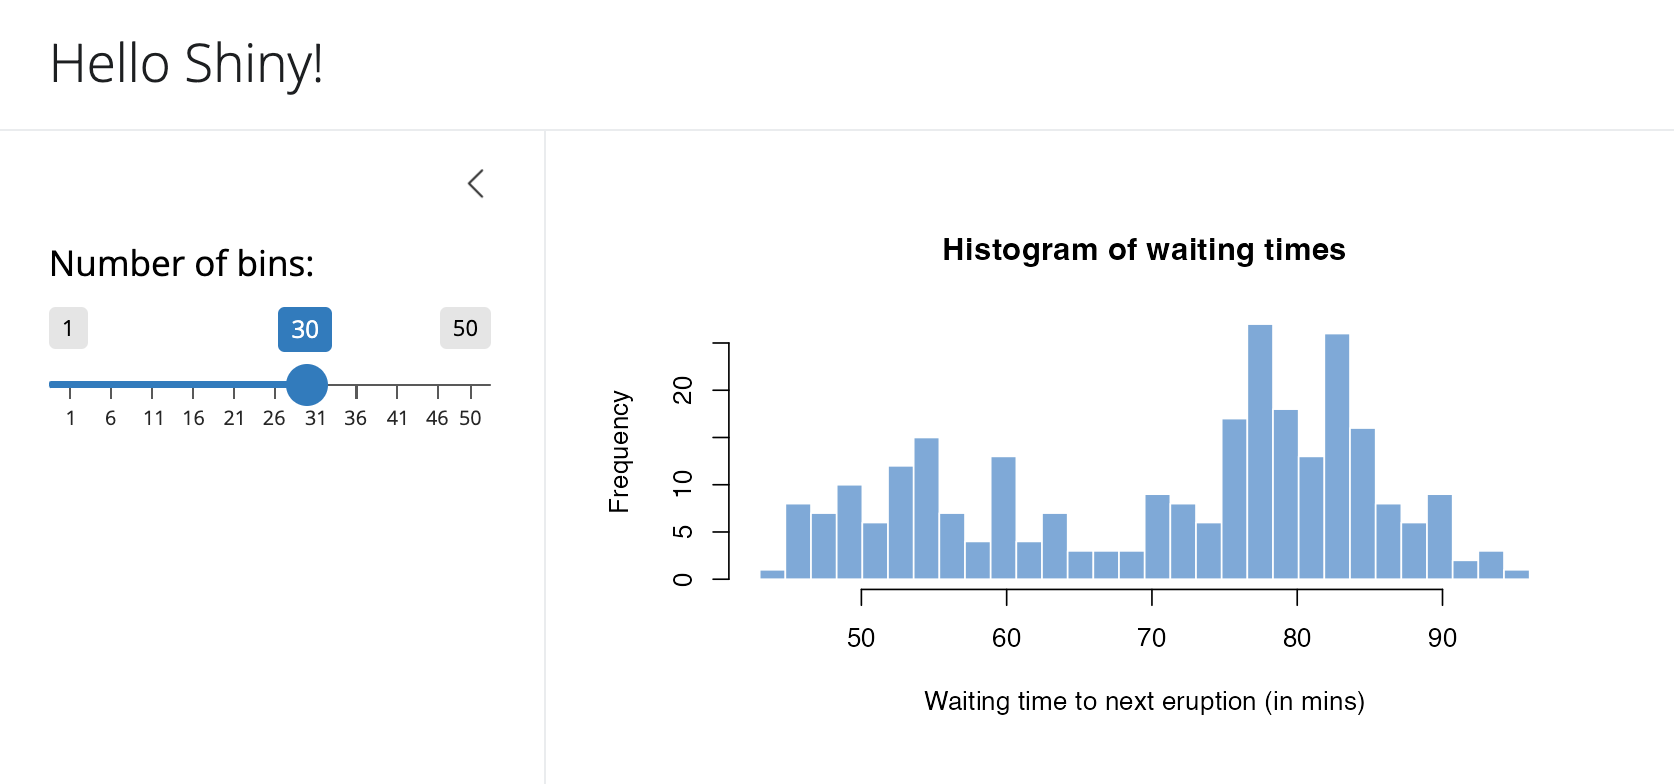 Base Hello Shiny! Shiny app with a slider of Number of bins on the left and a histogram of waiting times on the right.